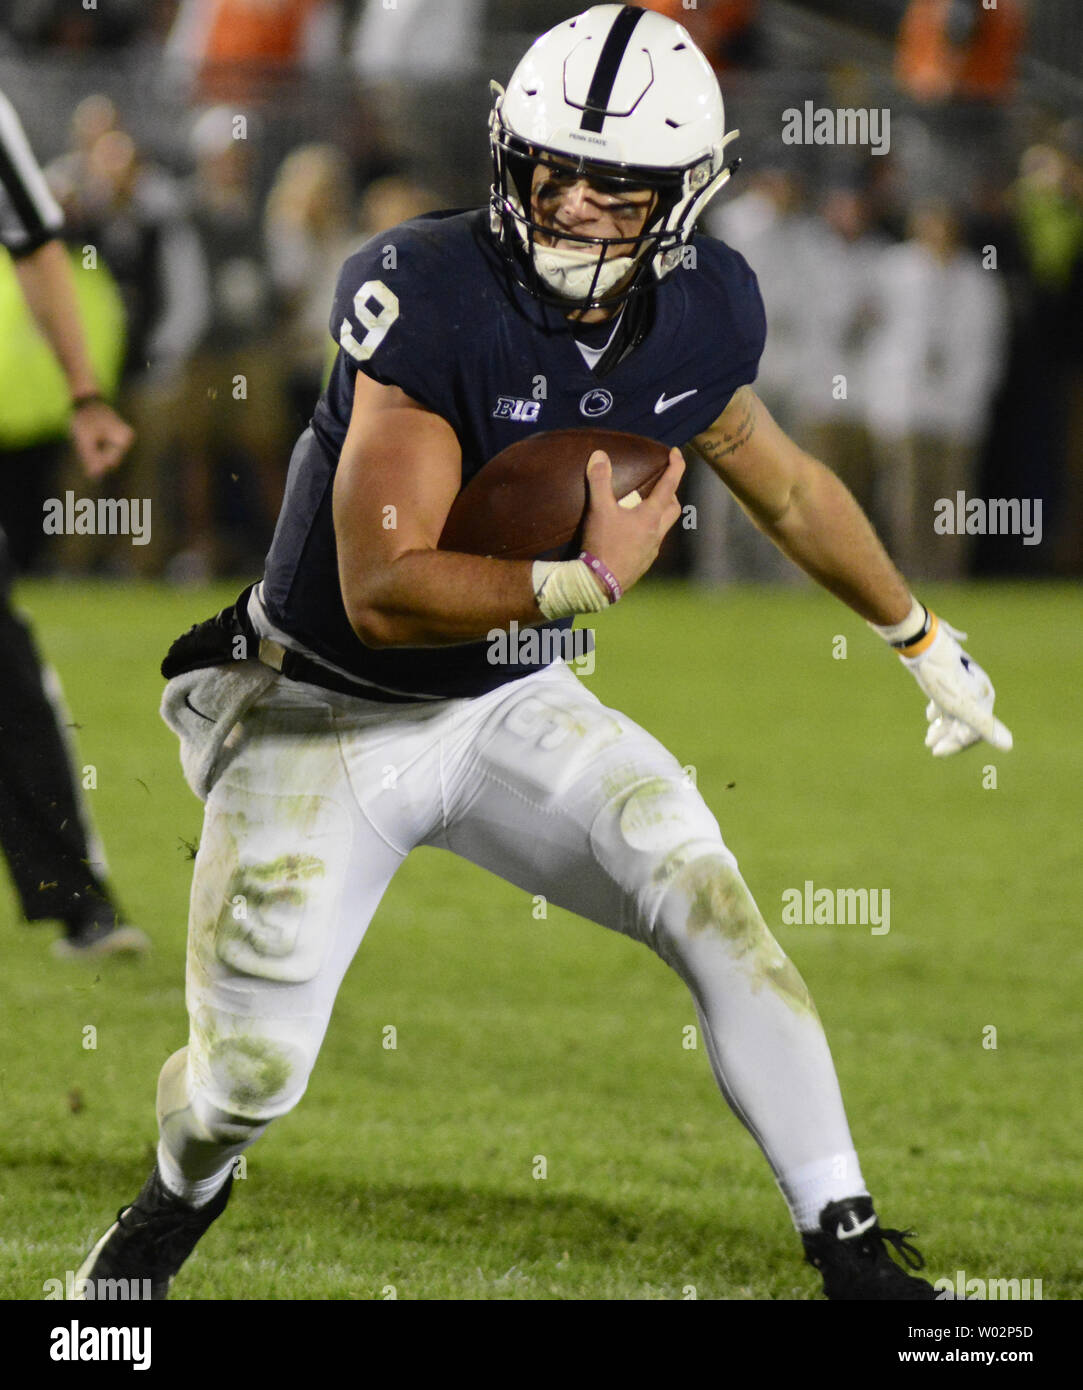 Penn State Nittany Lions quarterback Trace McSorley (9) cuts to the left and gains 13 yards in the fourth quarter of the Ohio State Buckeyes 27-26 victory at Beaver Stadium in State College , Pennsylvania on September 29, 2018. Photo by Archie Carpenter/UPI Stock Photo